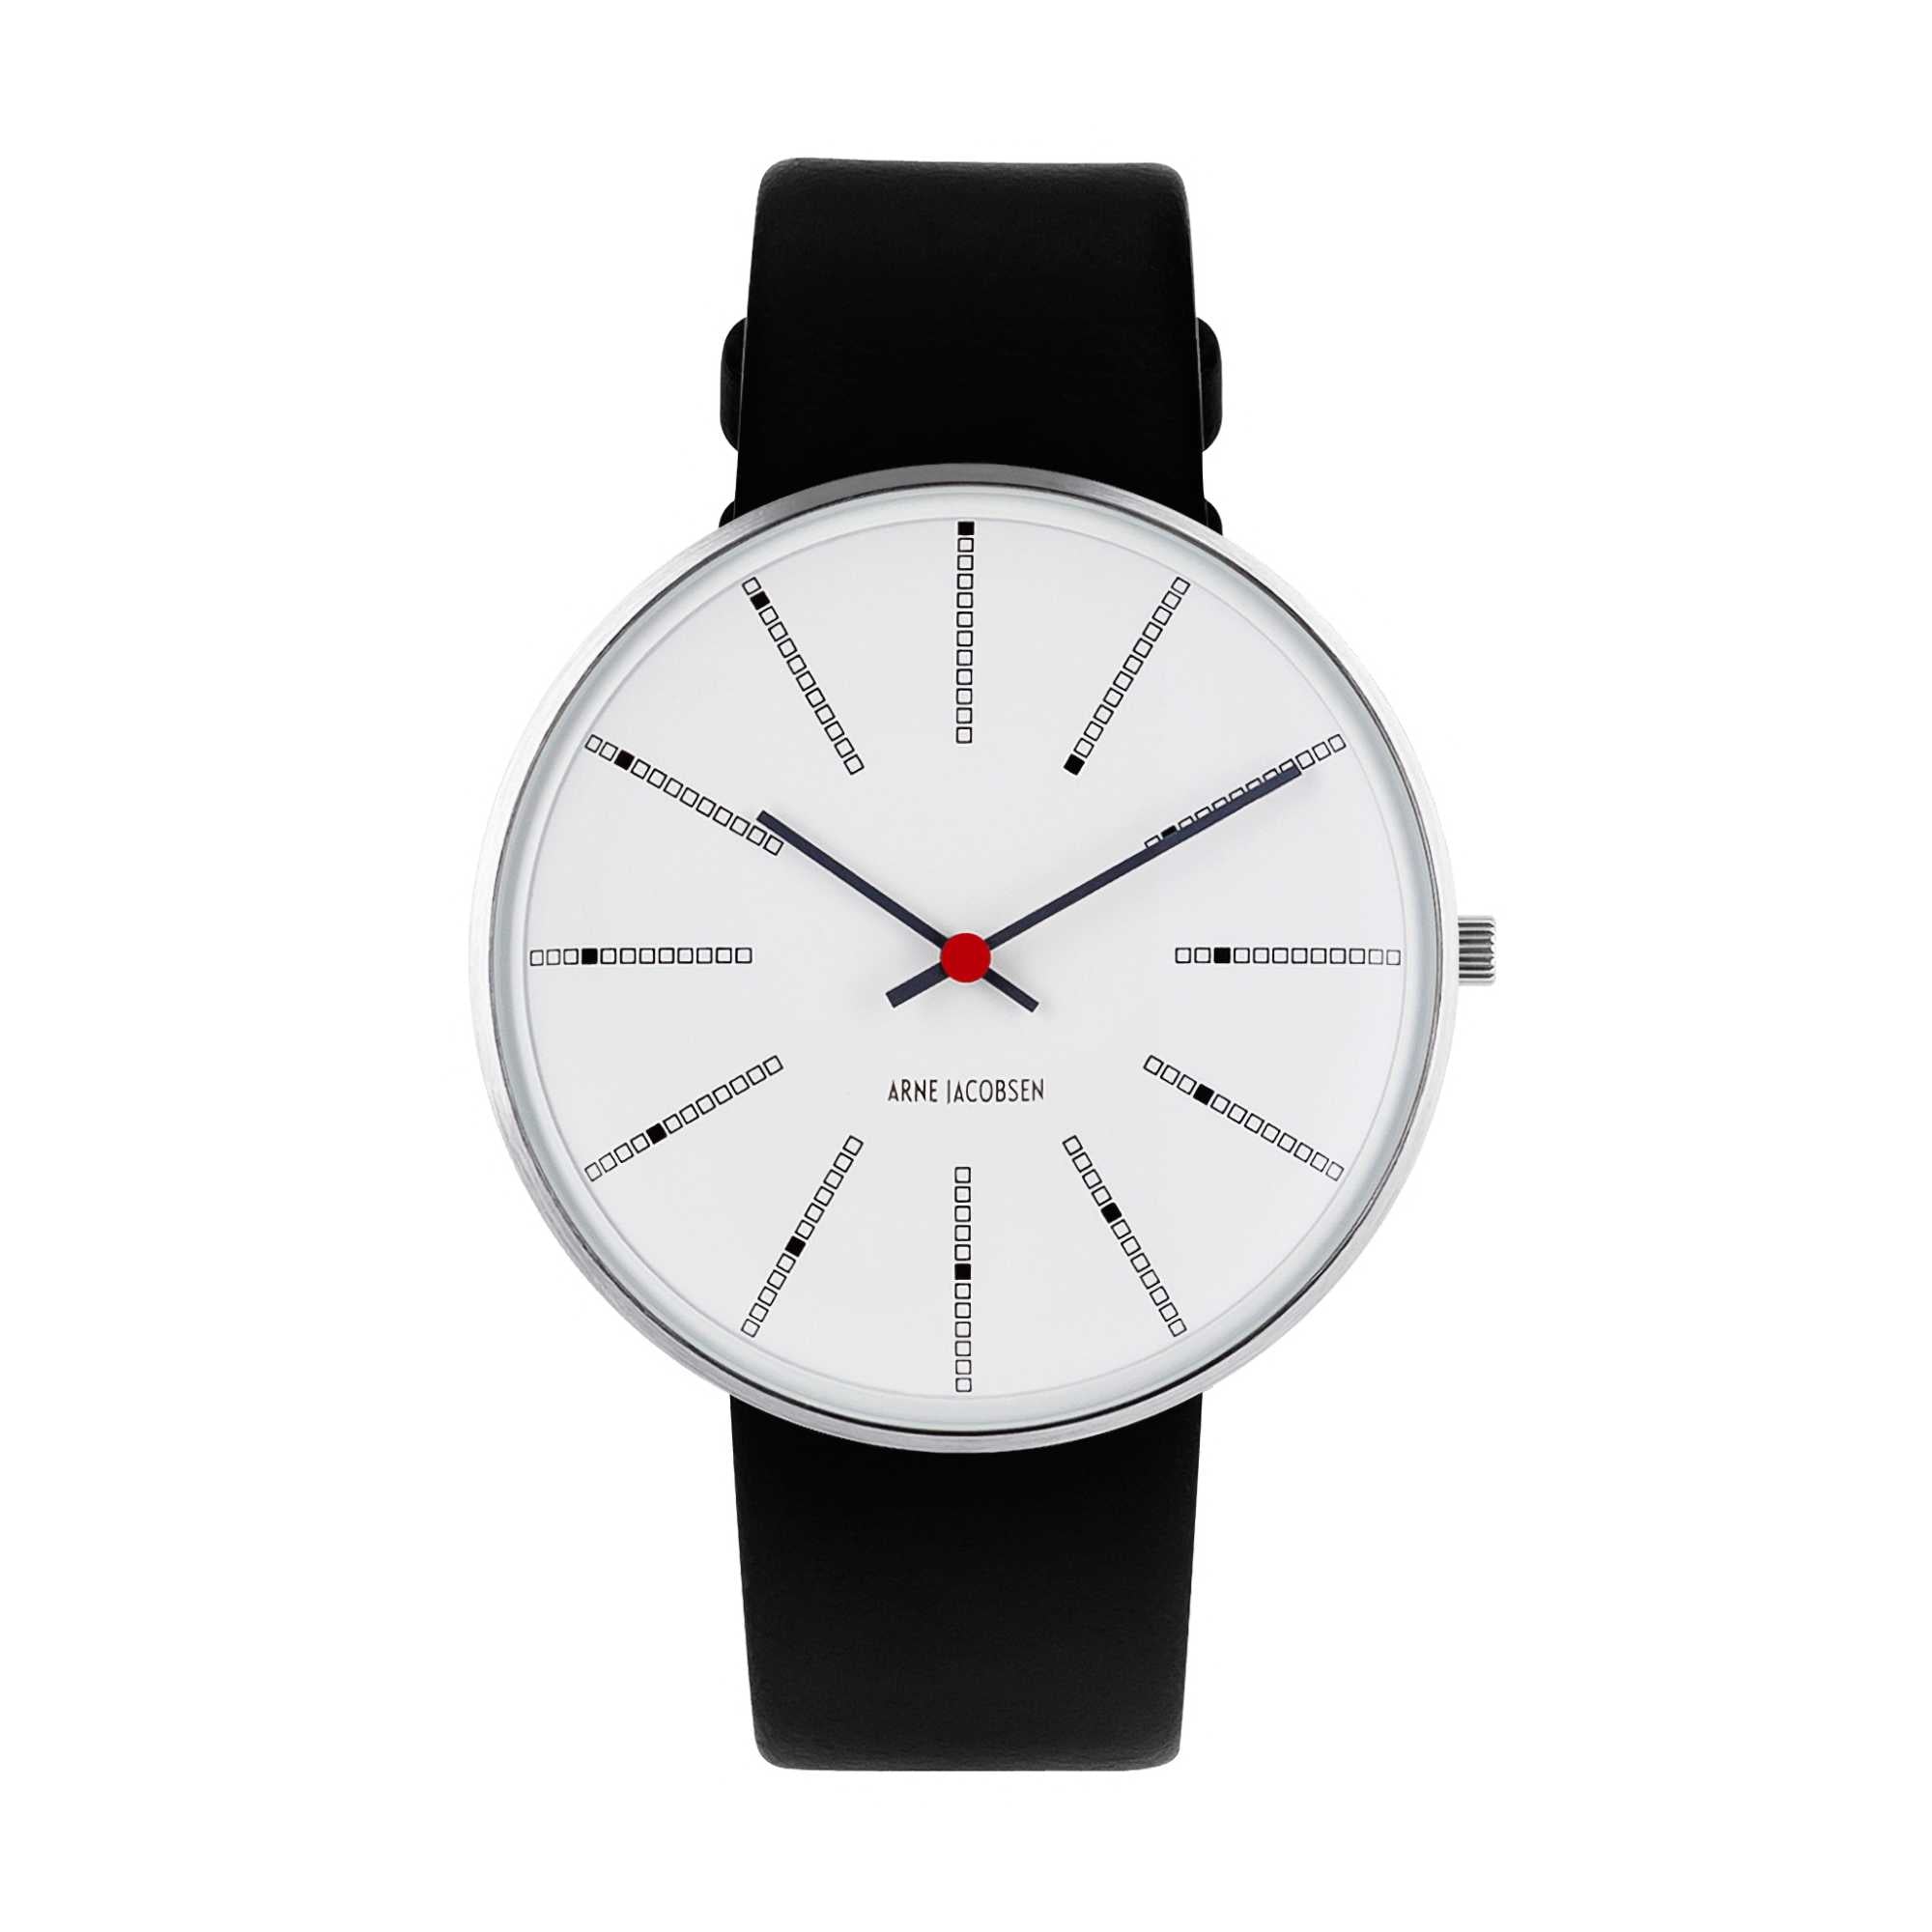 Arne Jacobsen Bankers Watch with Black Leather Strap, White